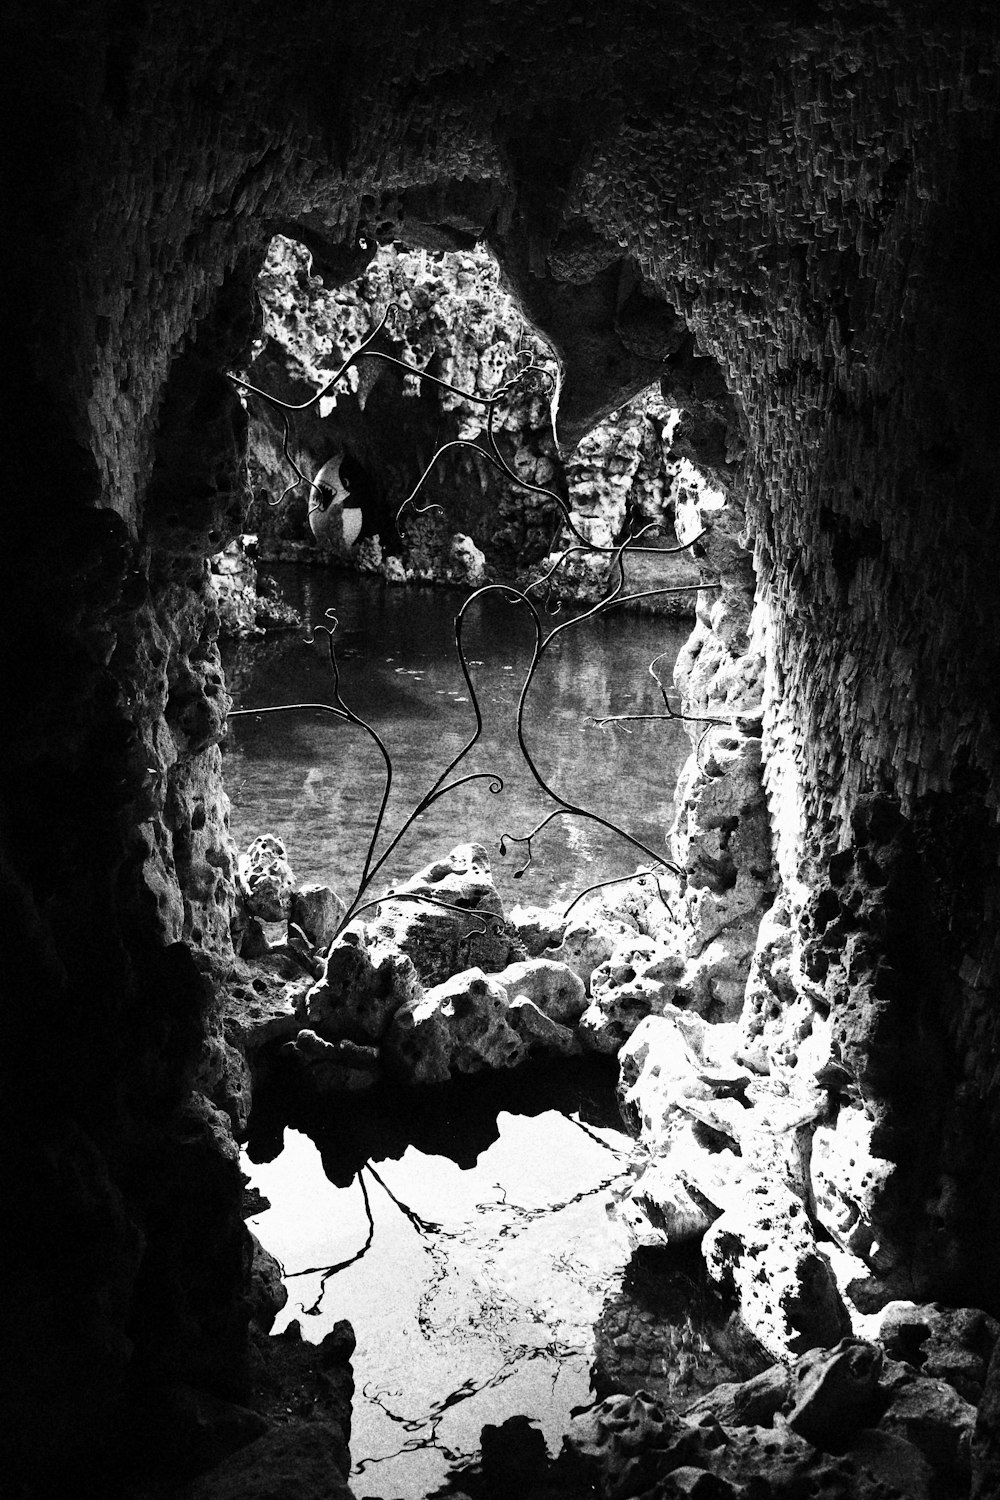 a black and white photo of a cave entrance